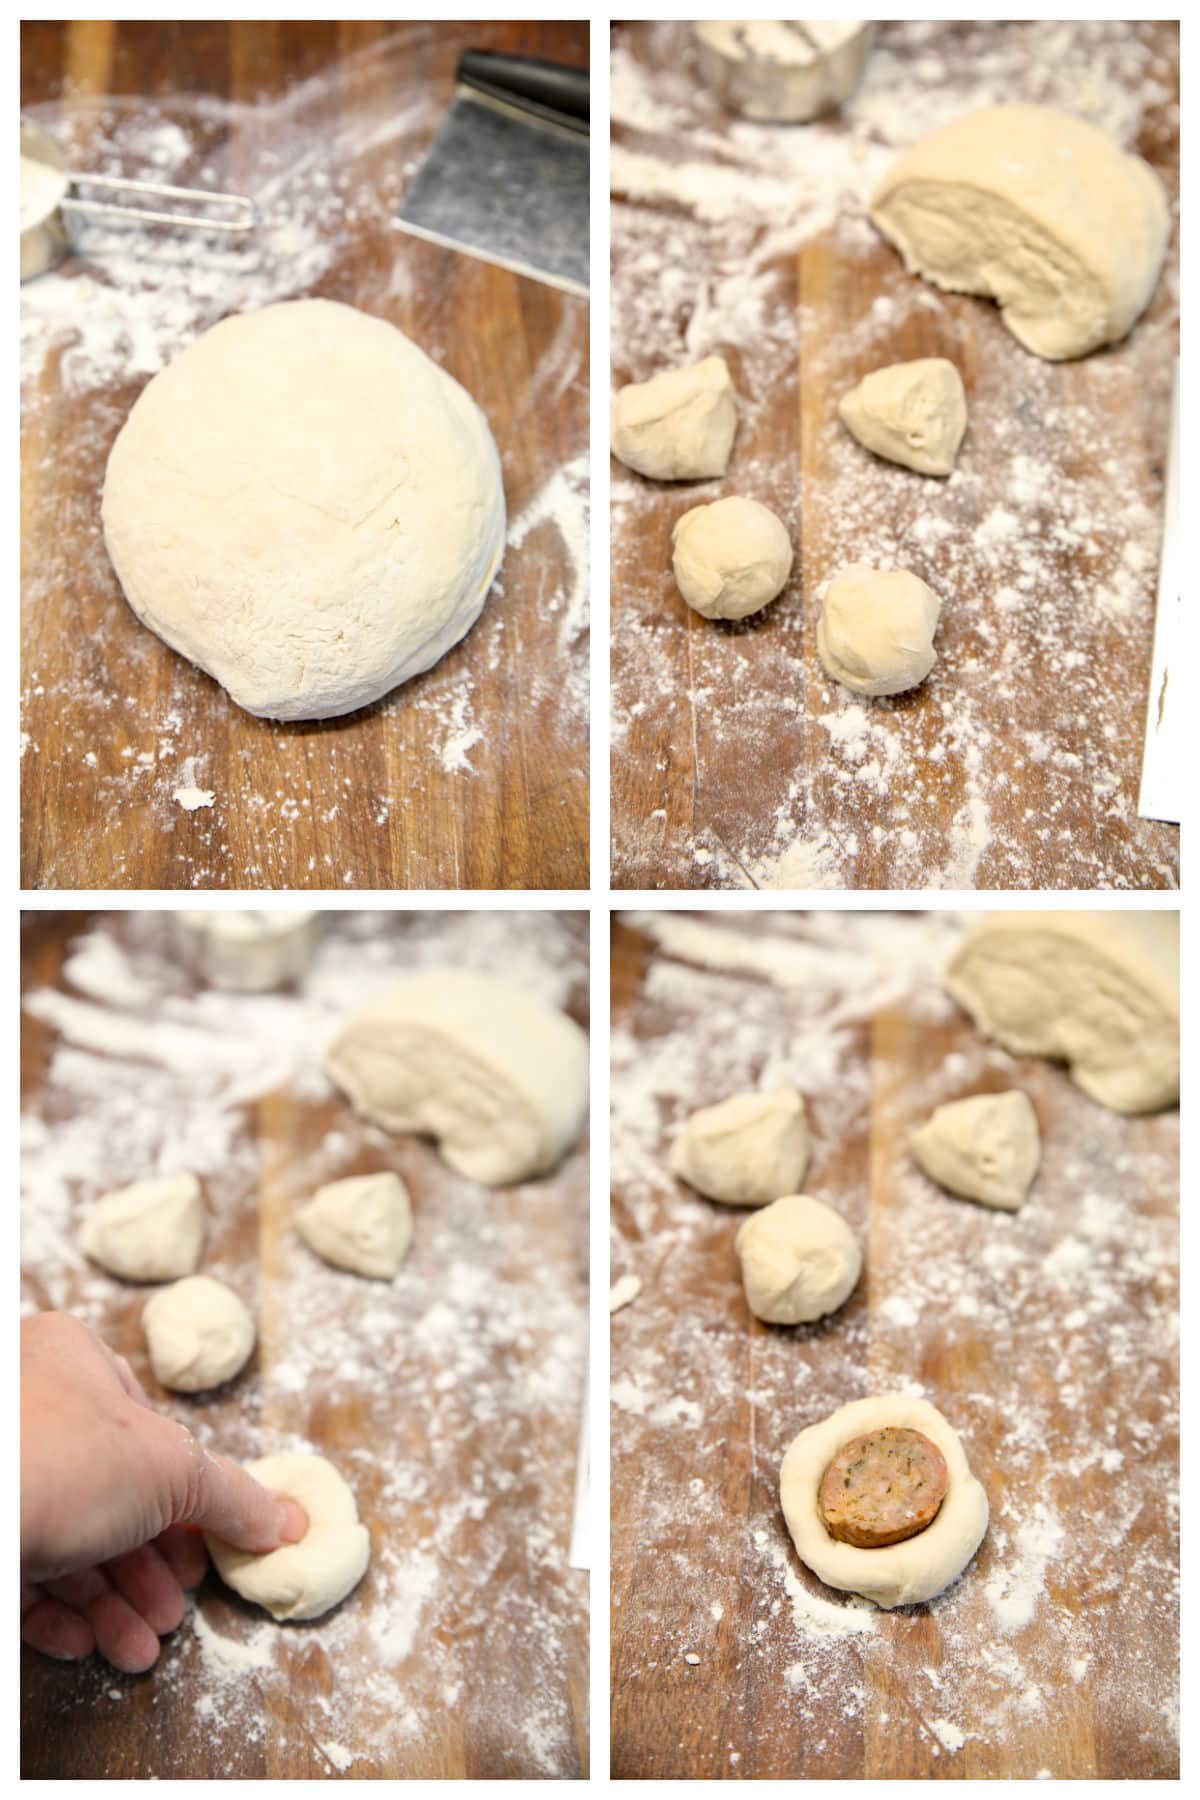 Shaping pizza dough into appetizer bites with smoked sausage slices.